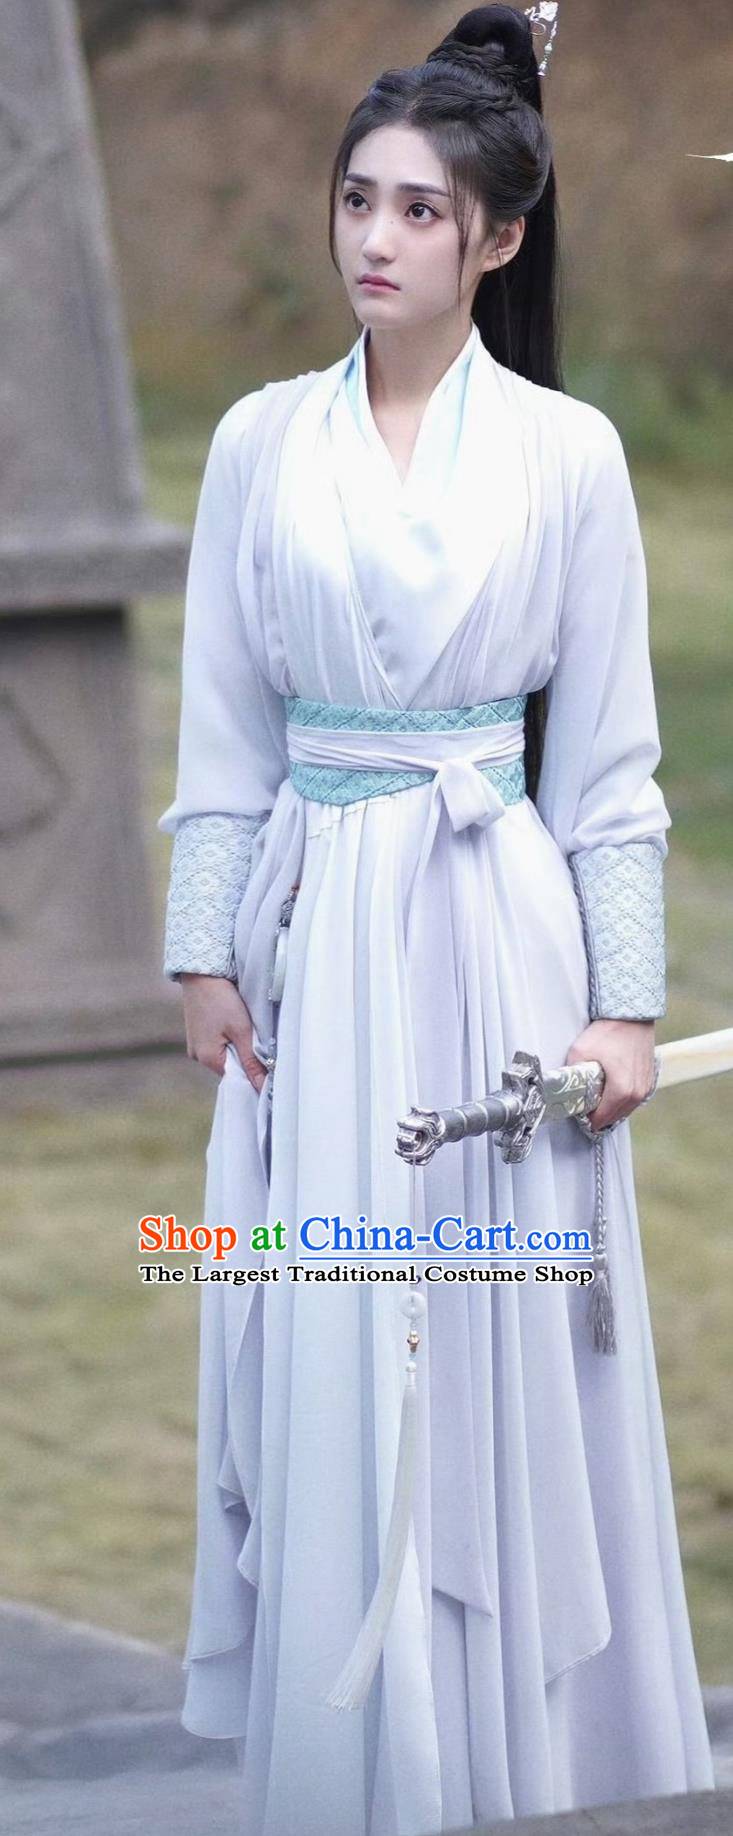 Ancient Chinese Swordswoman Clothing Traditional Wuxia Costume 2023 TV Series Back From The Brink Zi Yue Dresses